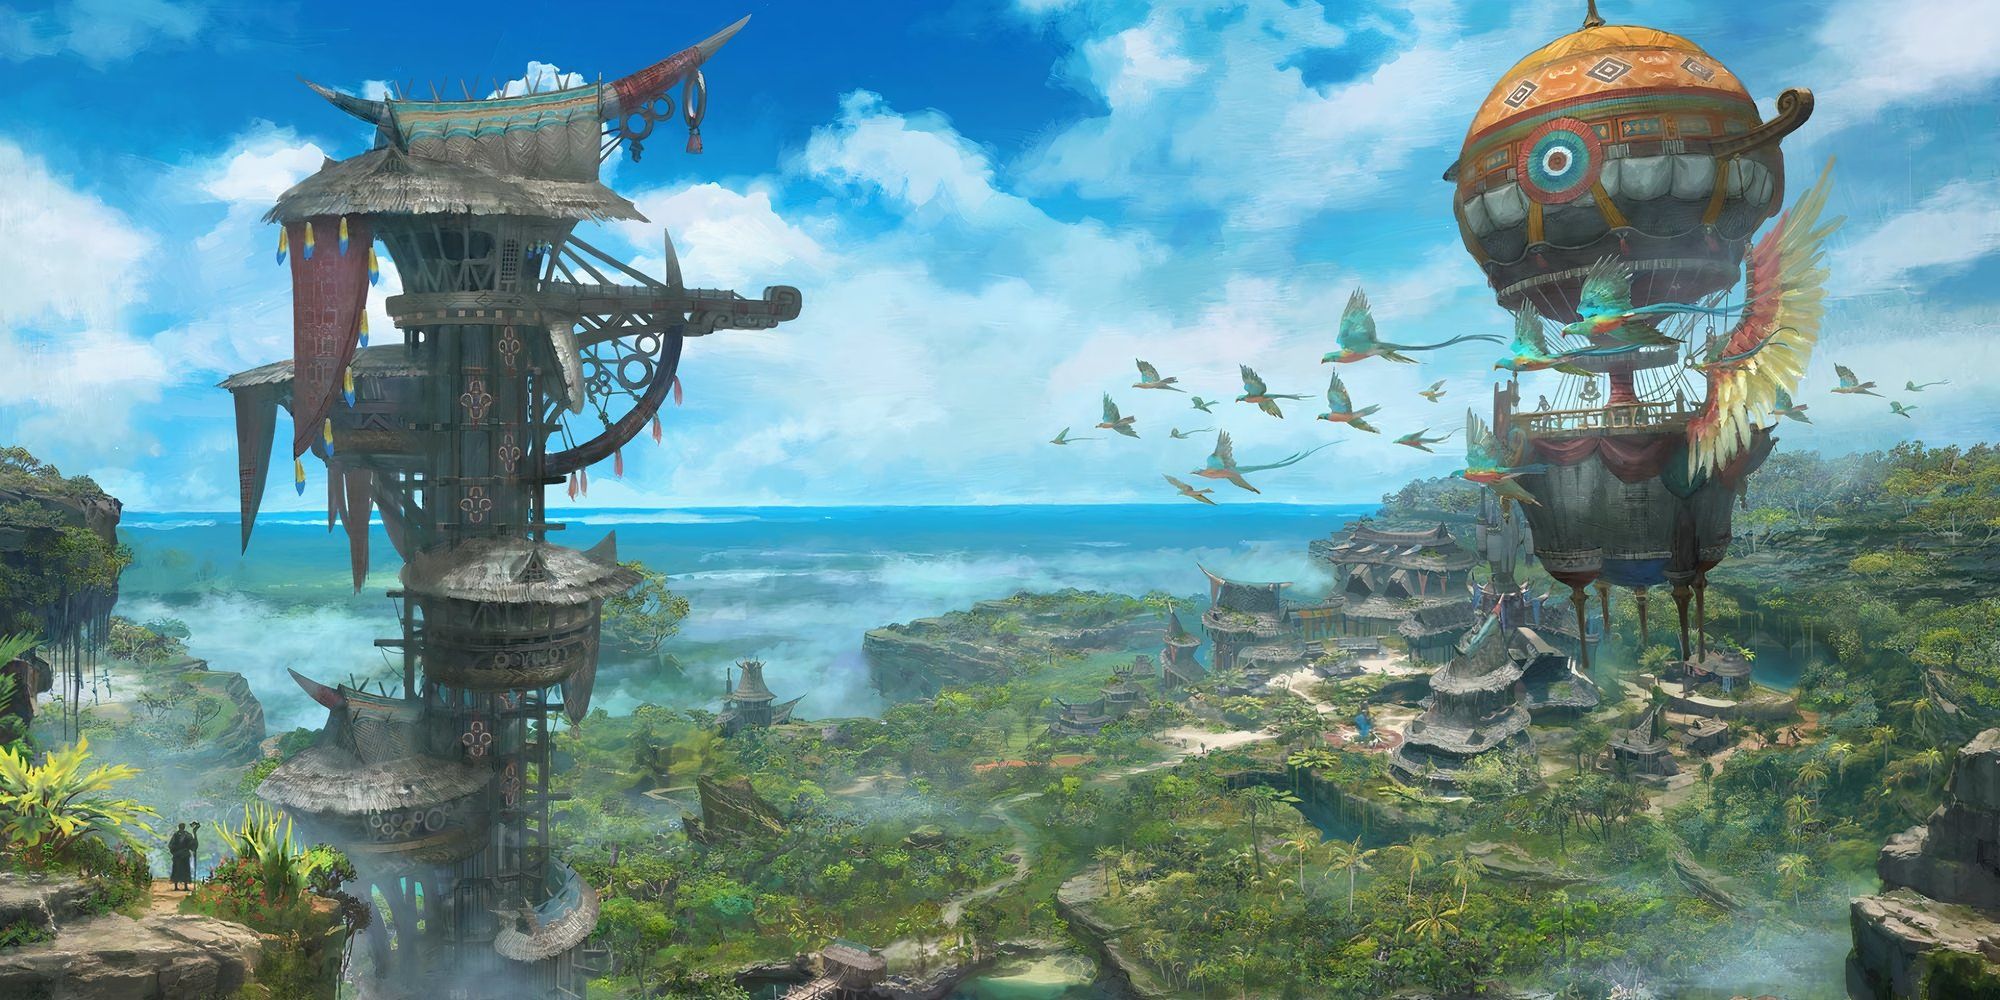 Promotional image of the New World from Final Fantasy 14 Dawntrail